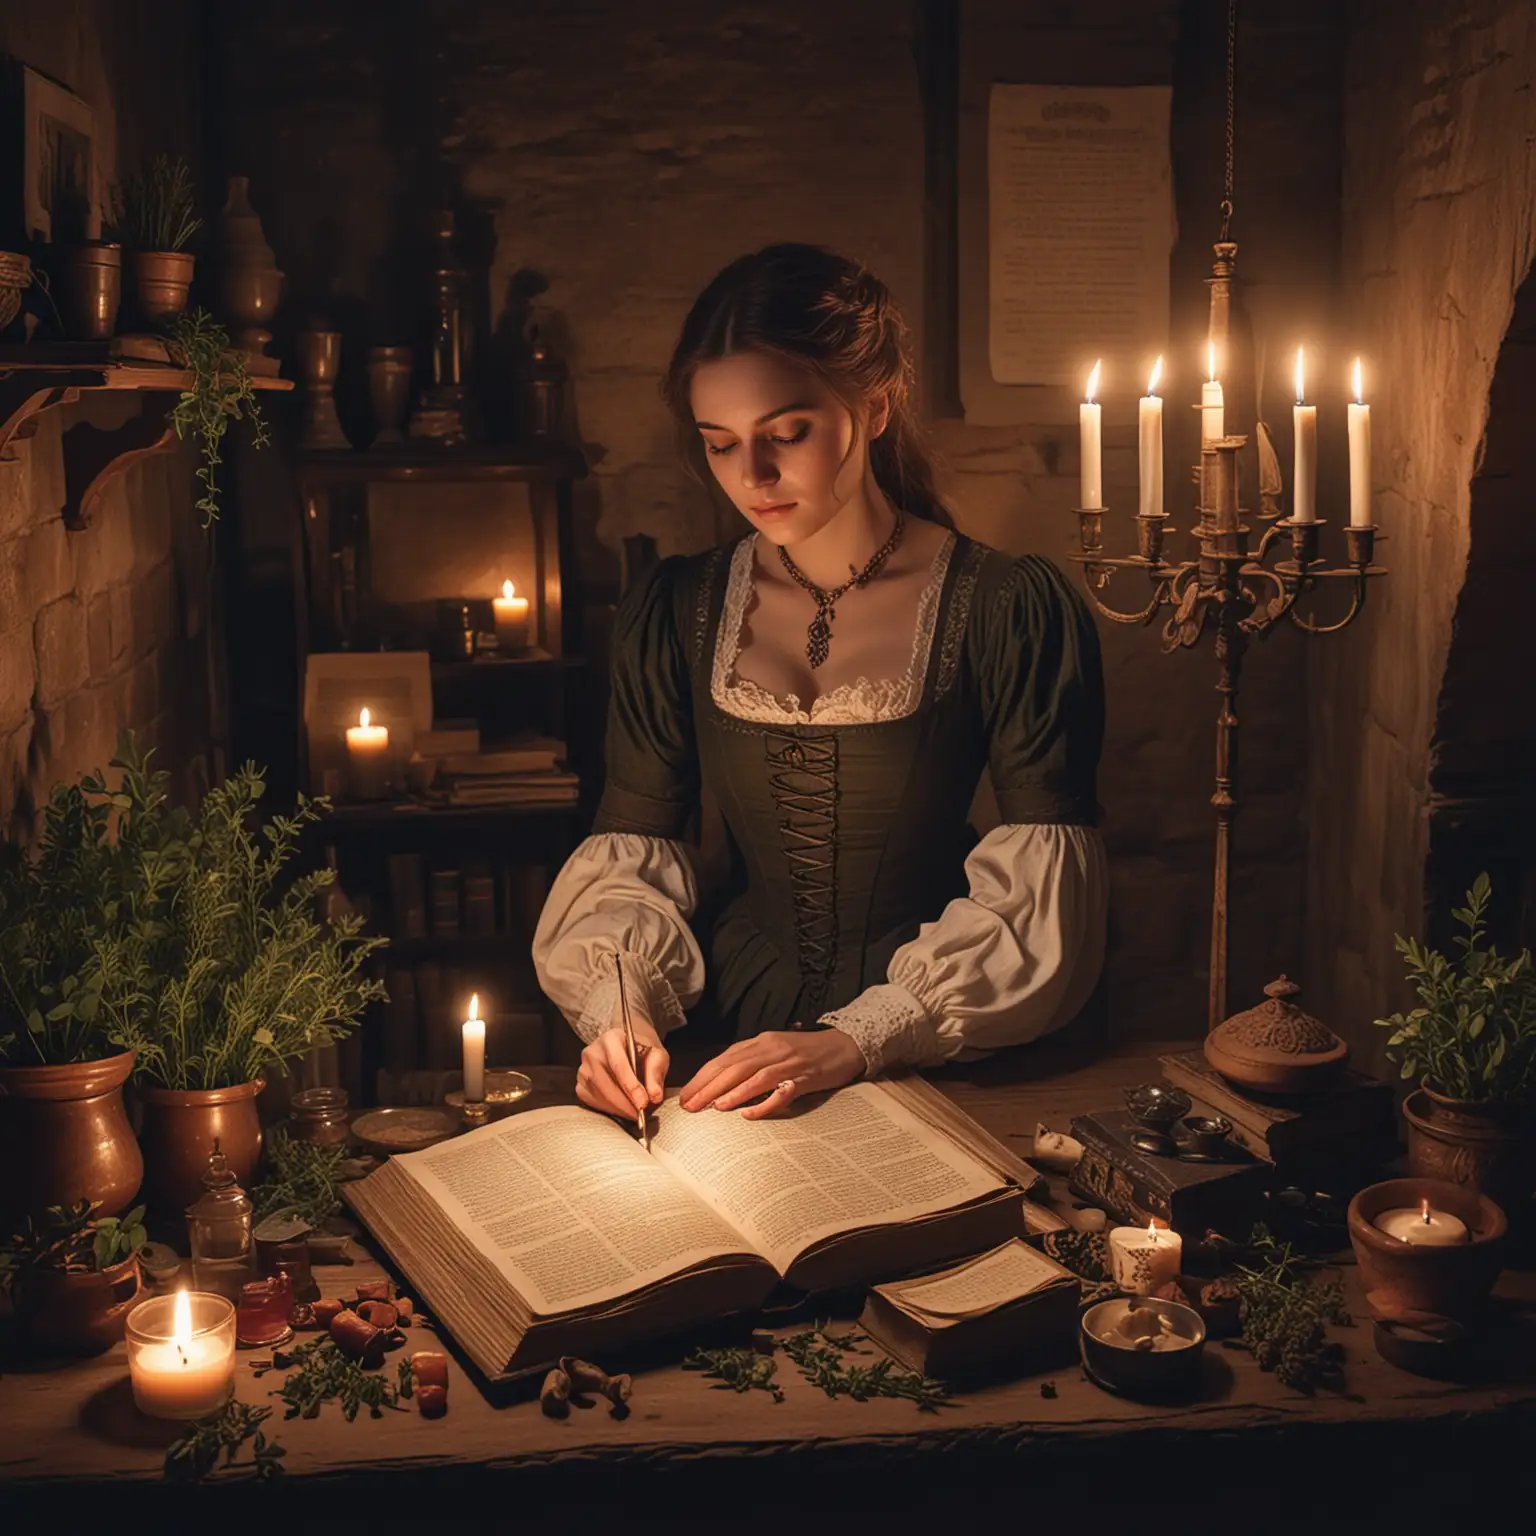 
A mysterious room with medieval architecture, candlelight, a beautiful twenty- year-old woman in Victorian attire, ritual ingredients - herbs, stones, and an ancient book, all set in the Victorian era.